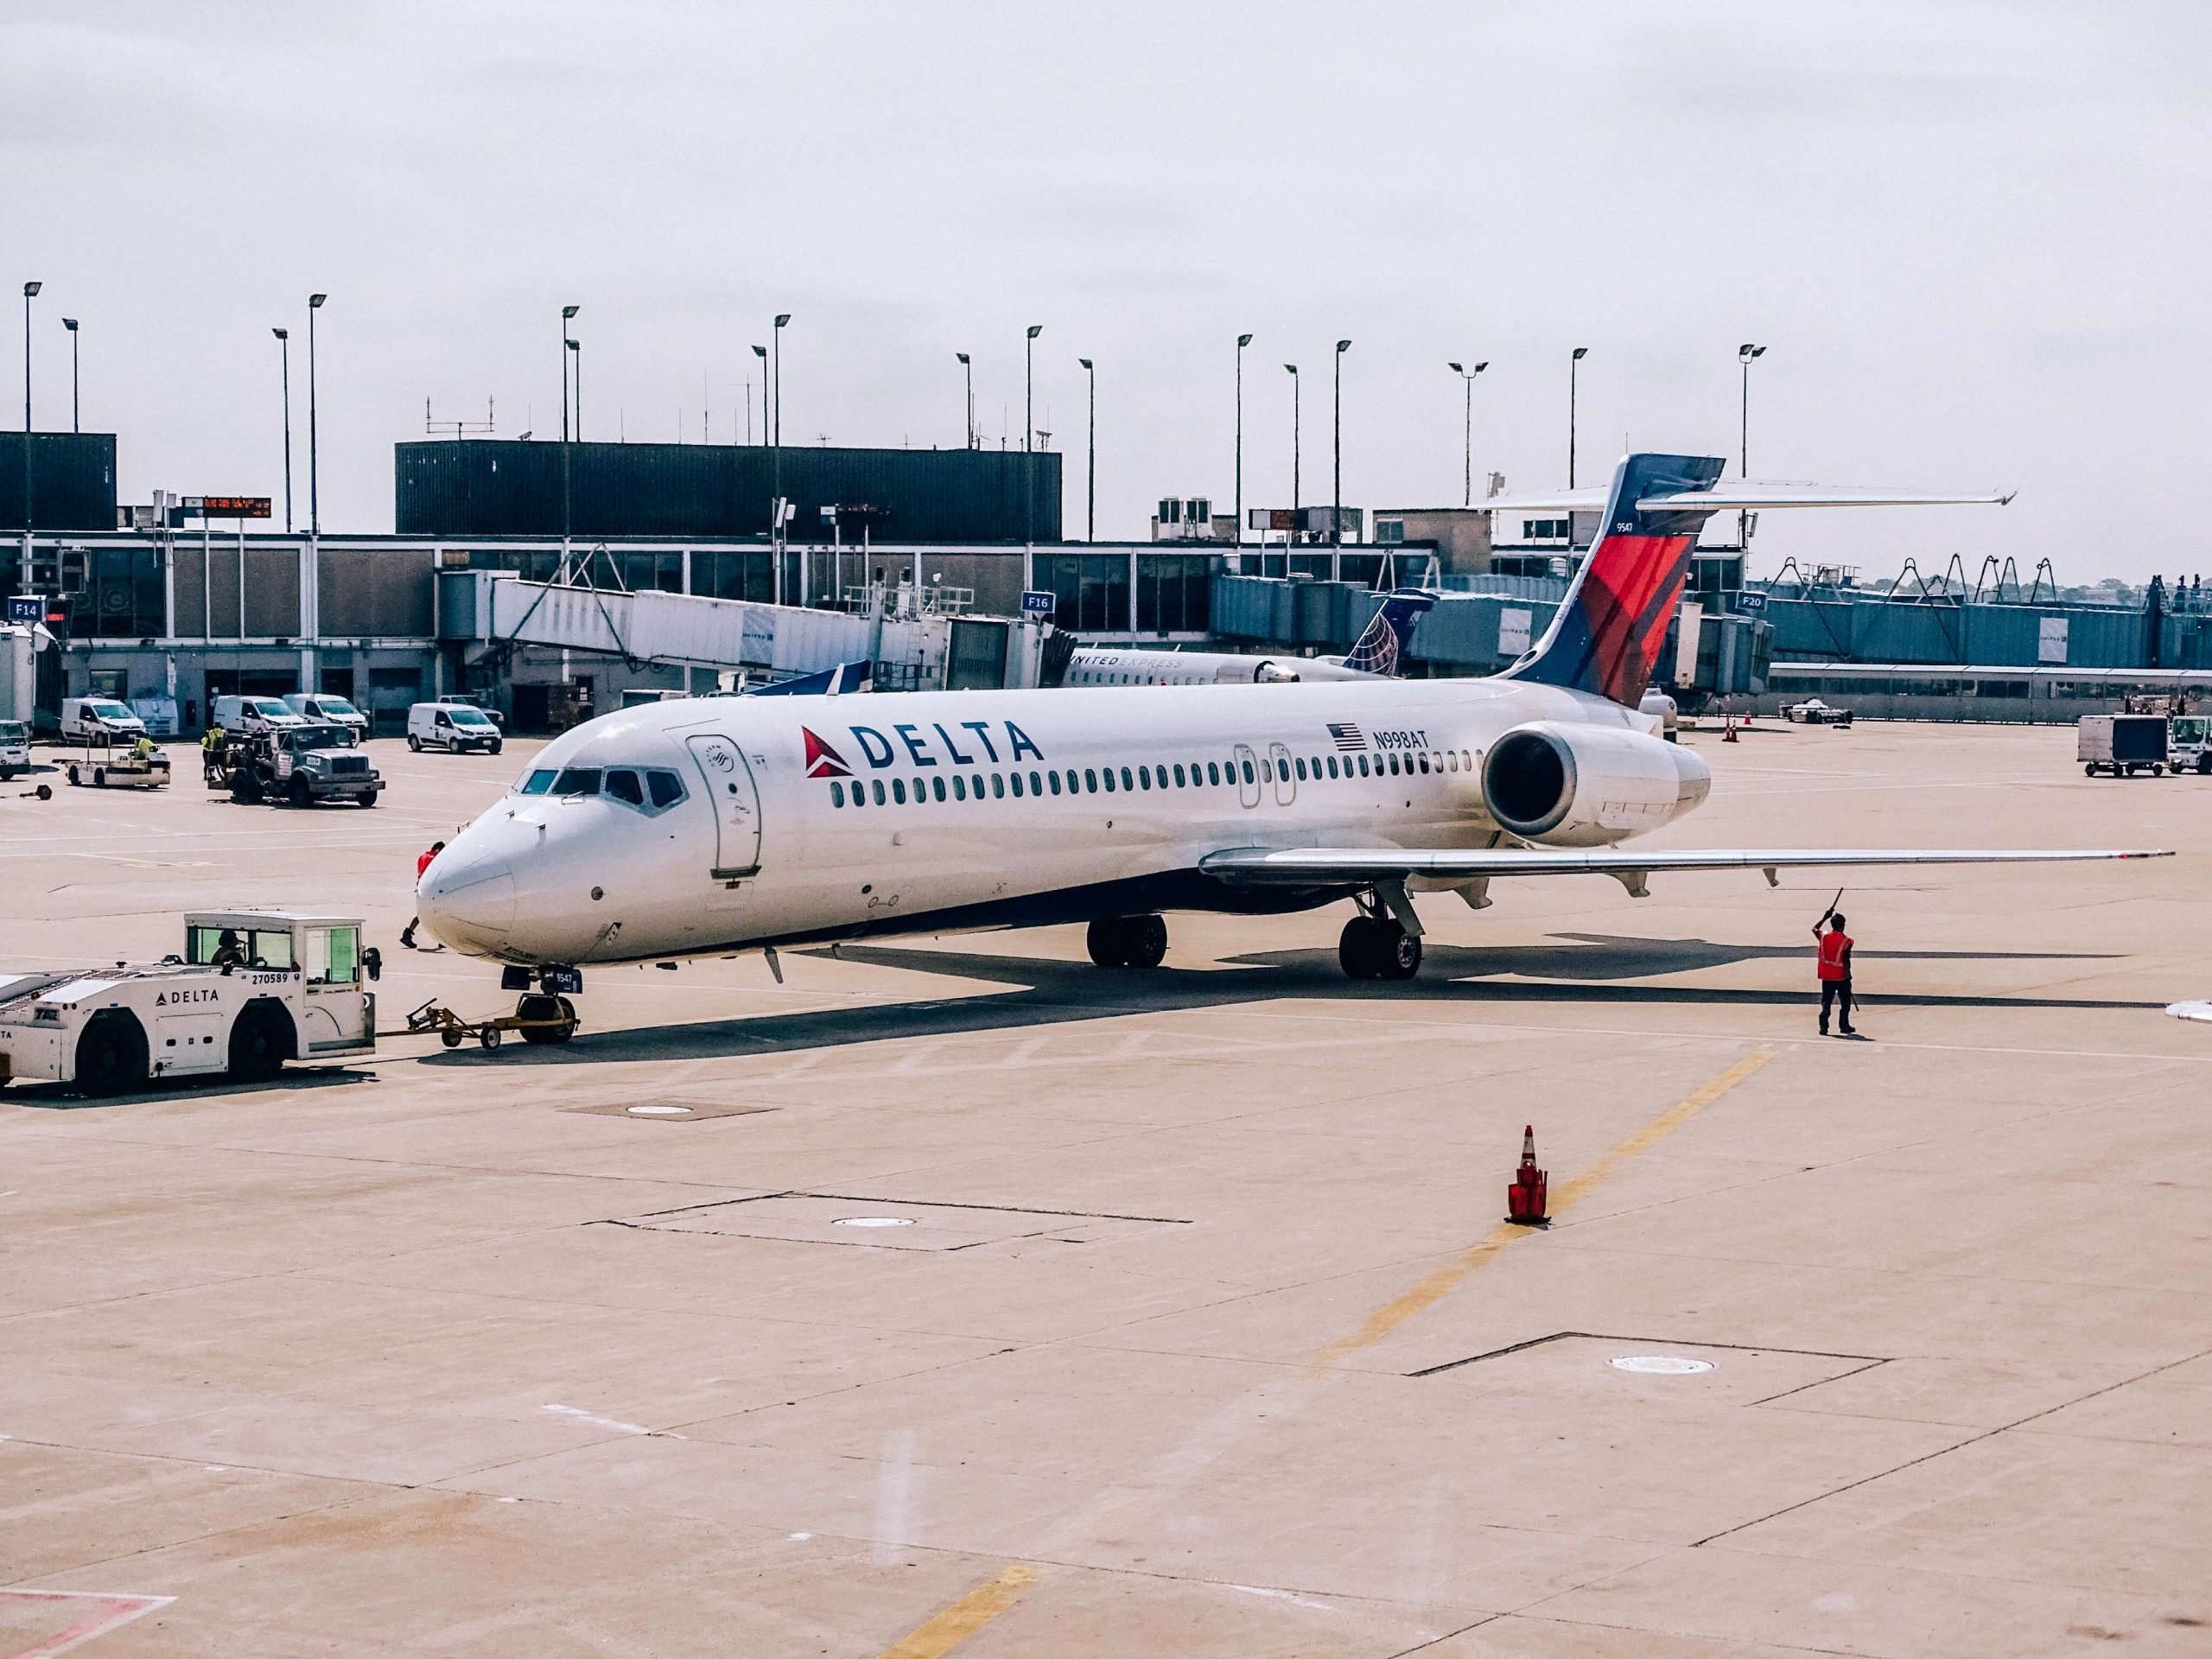 A delta airplane sitting on the tarmac at an airport